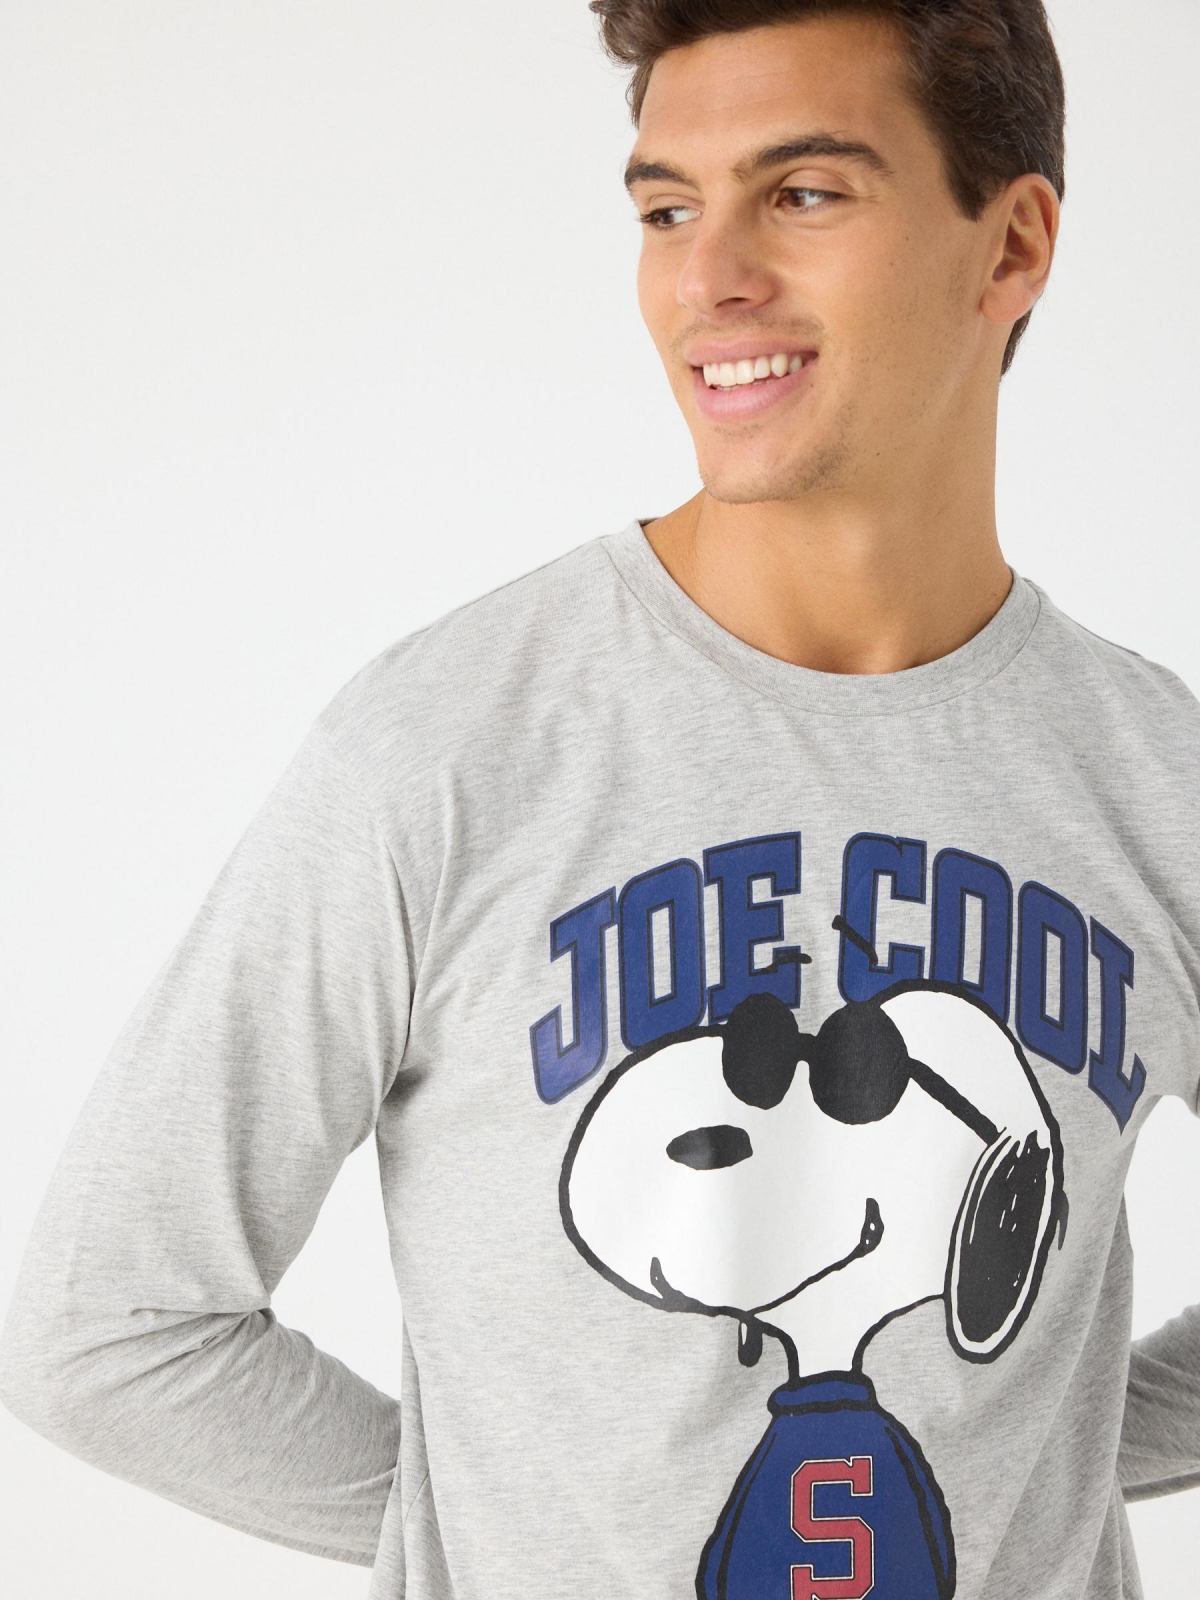 Snoopy long-sleeve t-shirt grey detail view